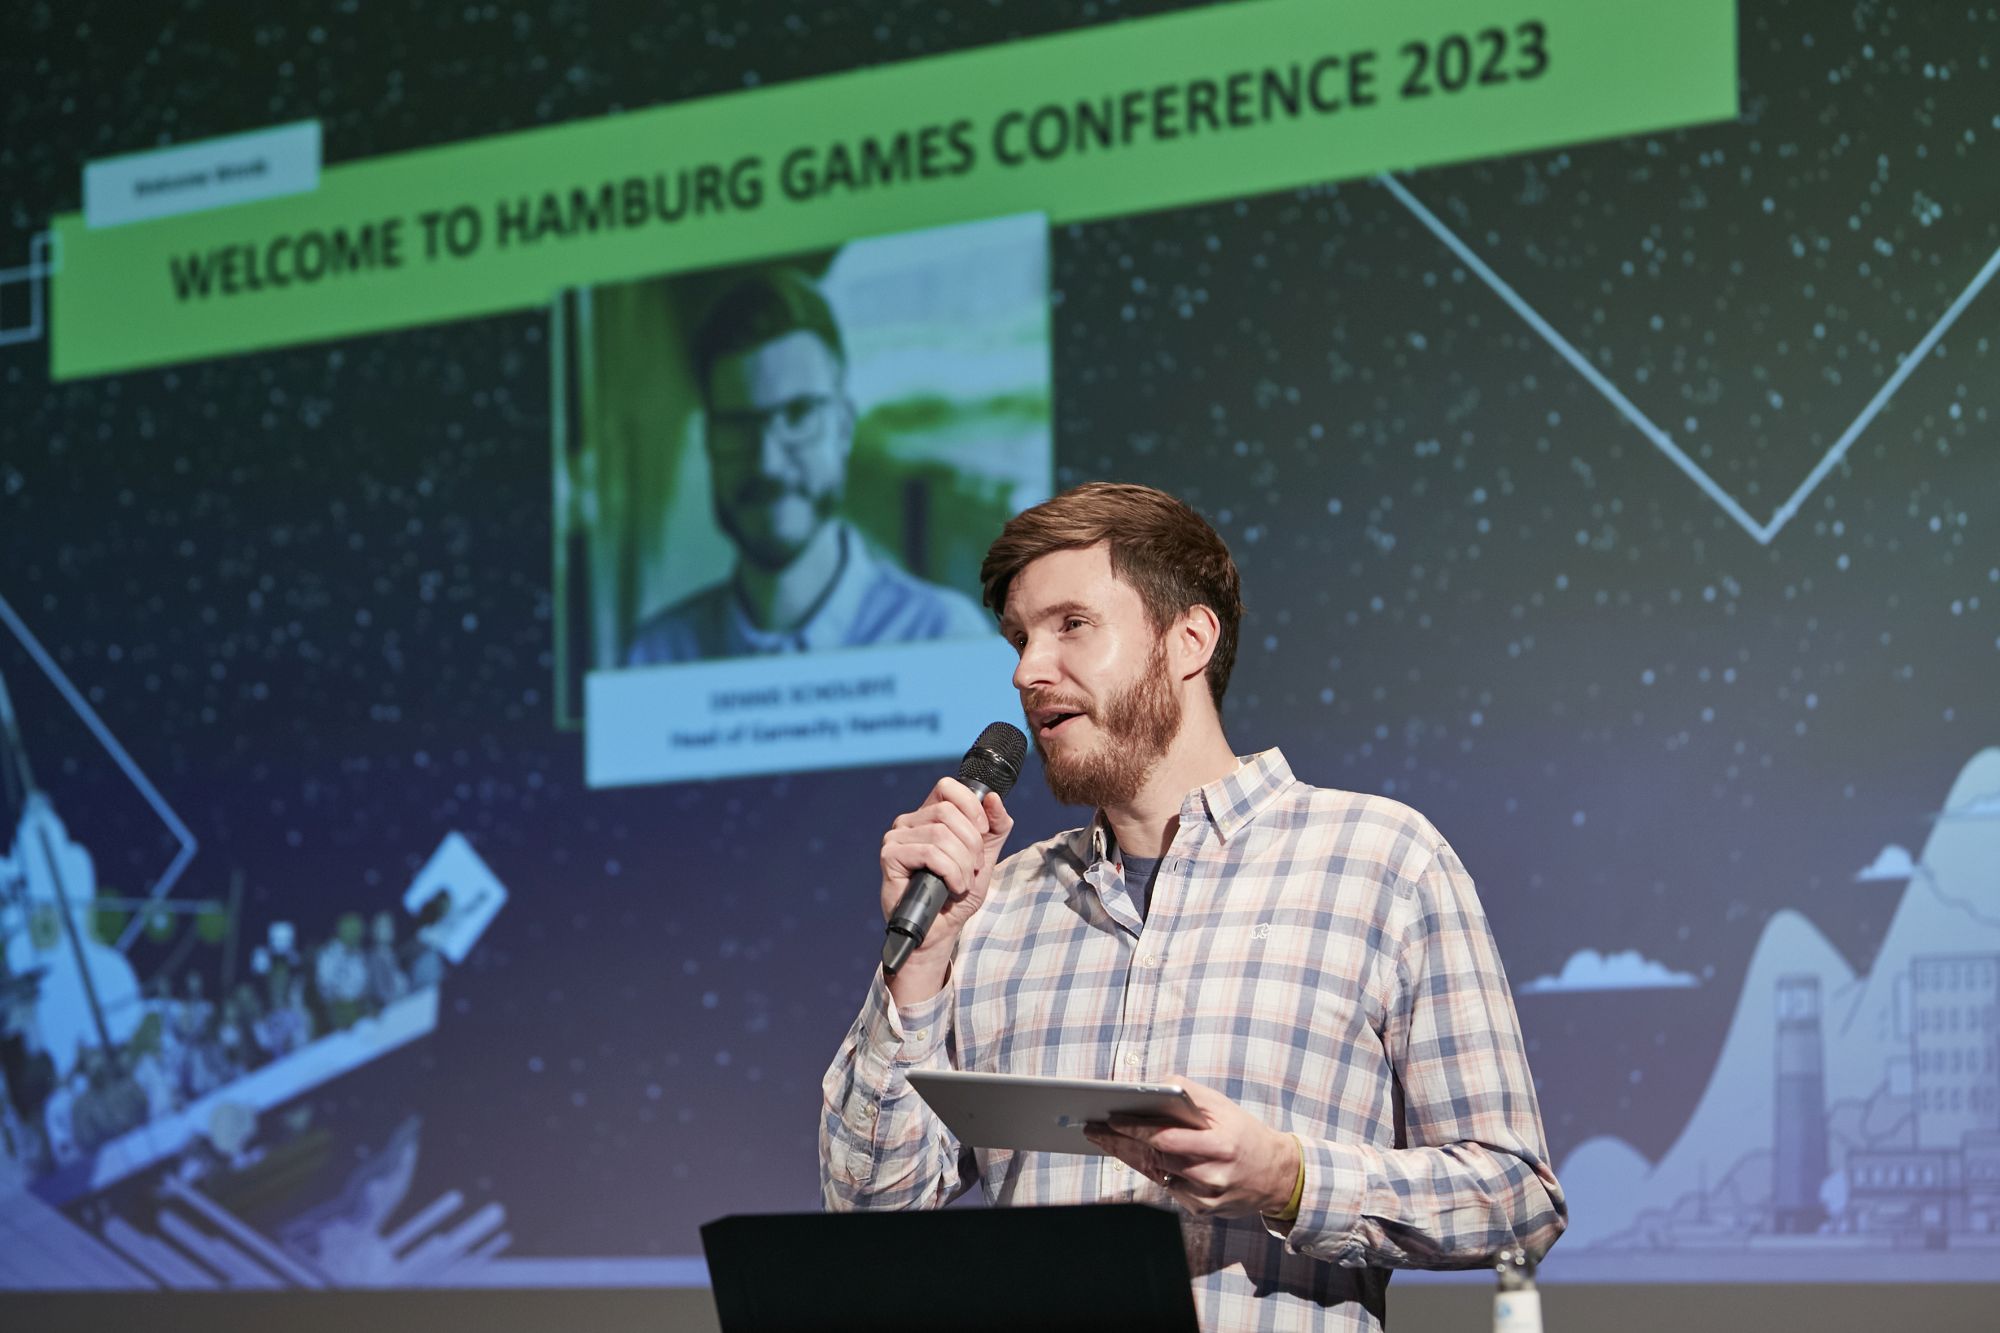 Dennis Schoubye welcoming the conference guests for Gamecity Hamburg | Photo by Rolf Otzipka